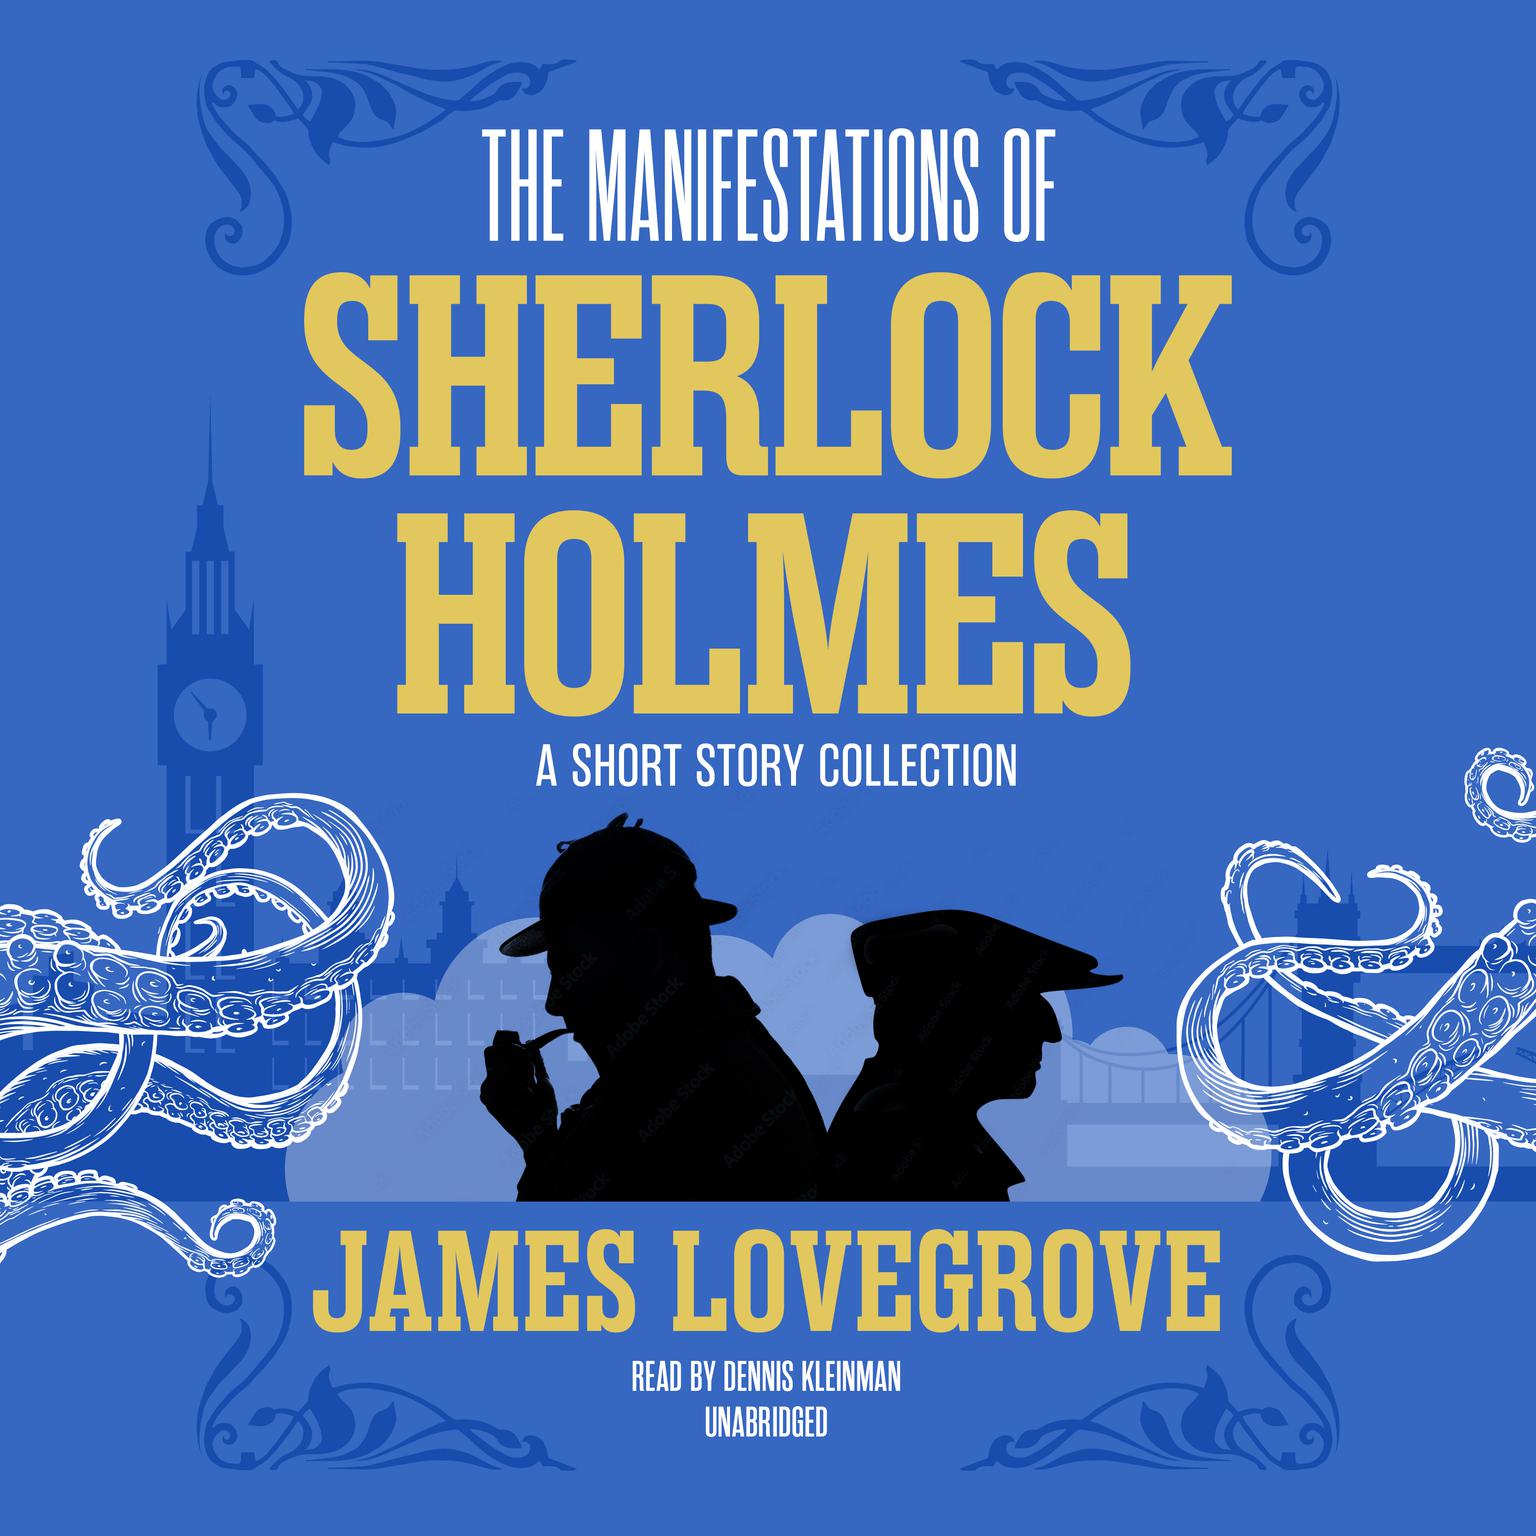 The Manifestations of Sherlock Holmes: A Short Story Collection Audiobook, by James Lovegrove